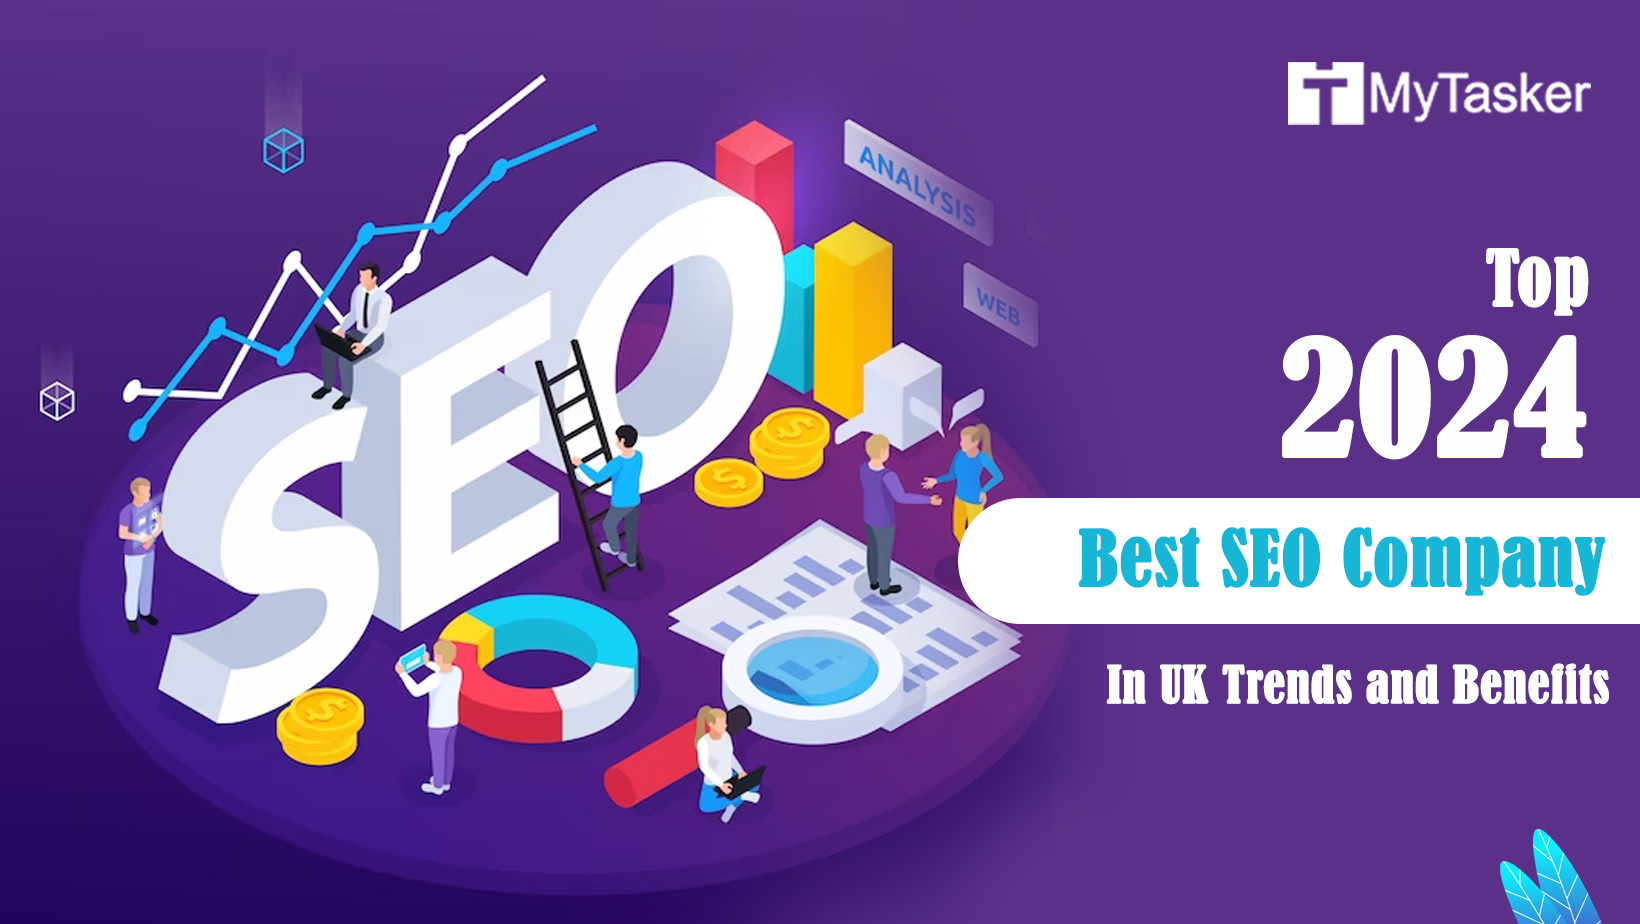 Top 2024 Best SEO Company In UK Trends and Benefits